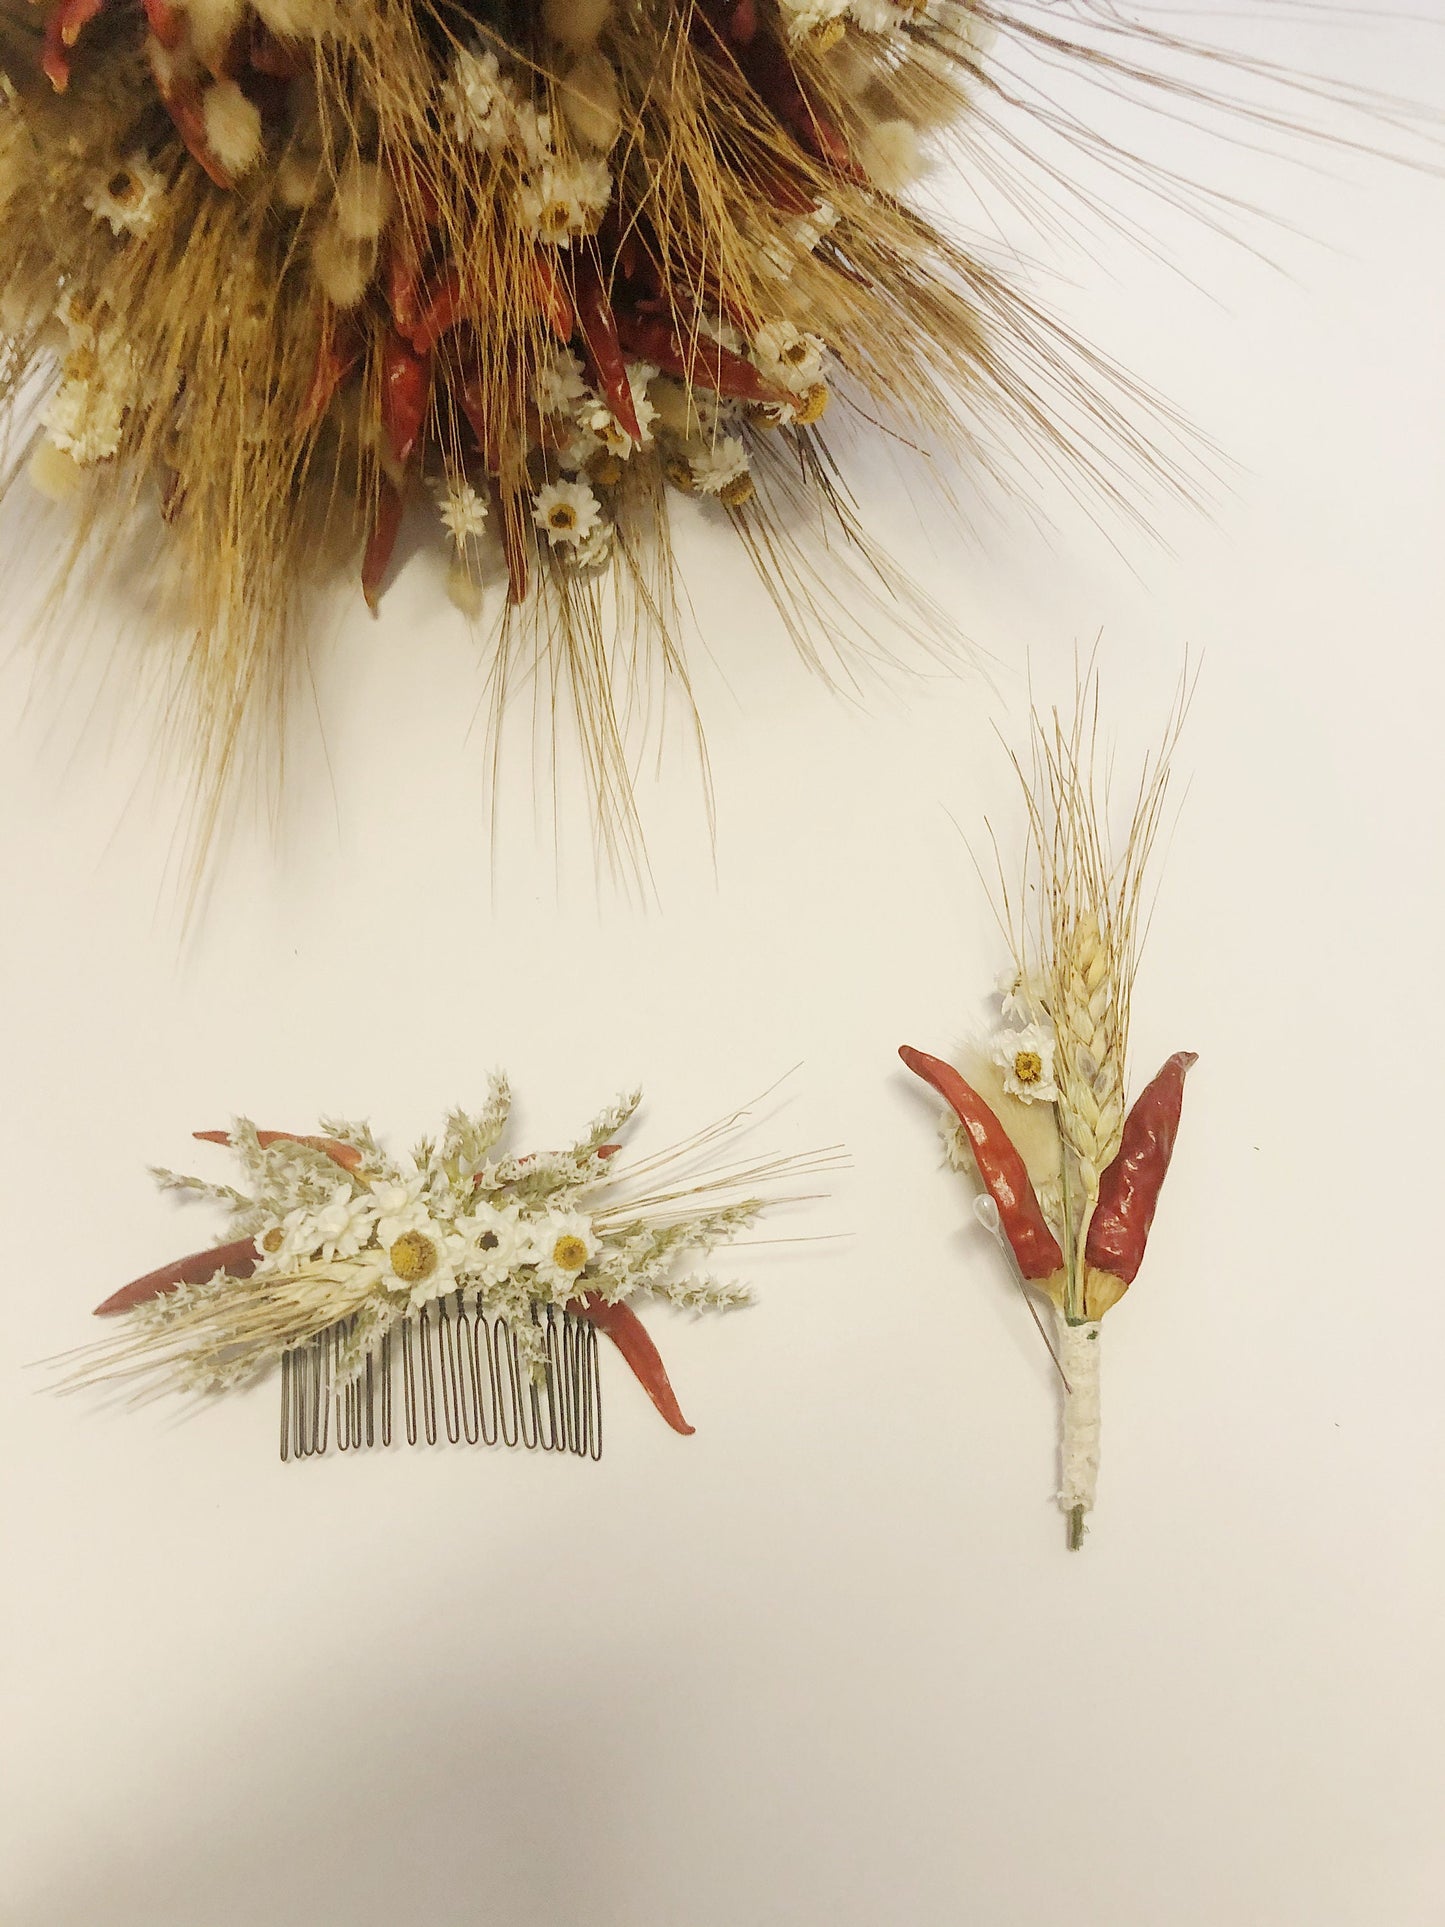 Fall Bouquet, Chili Peppers, Dried Flowers, Bunny Tails, Bridal, Red, Ammobium, Country, Preserved Flowers, Wheat